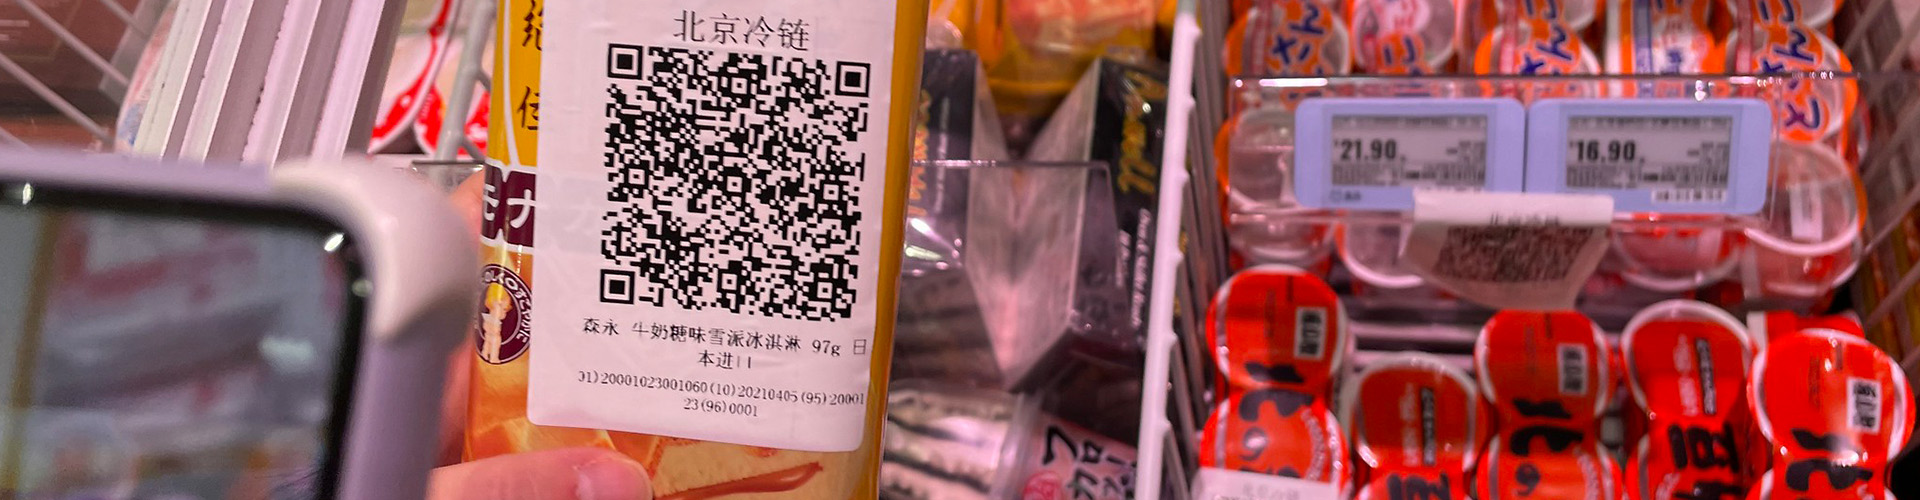 Hema Supermarket Report Banner featuring customer scanning QR code on product packaging